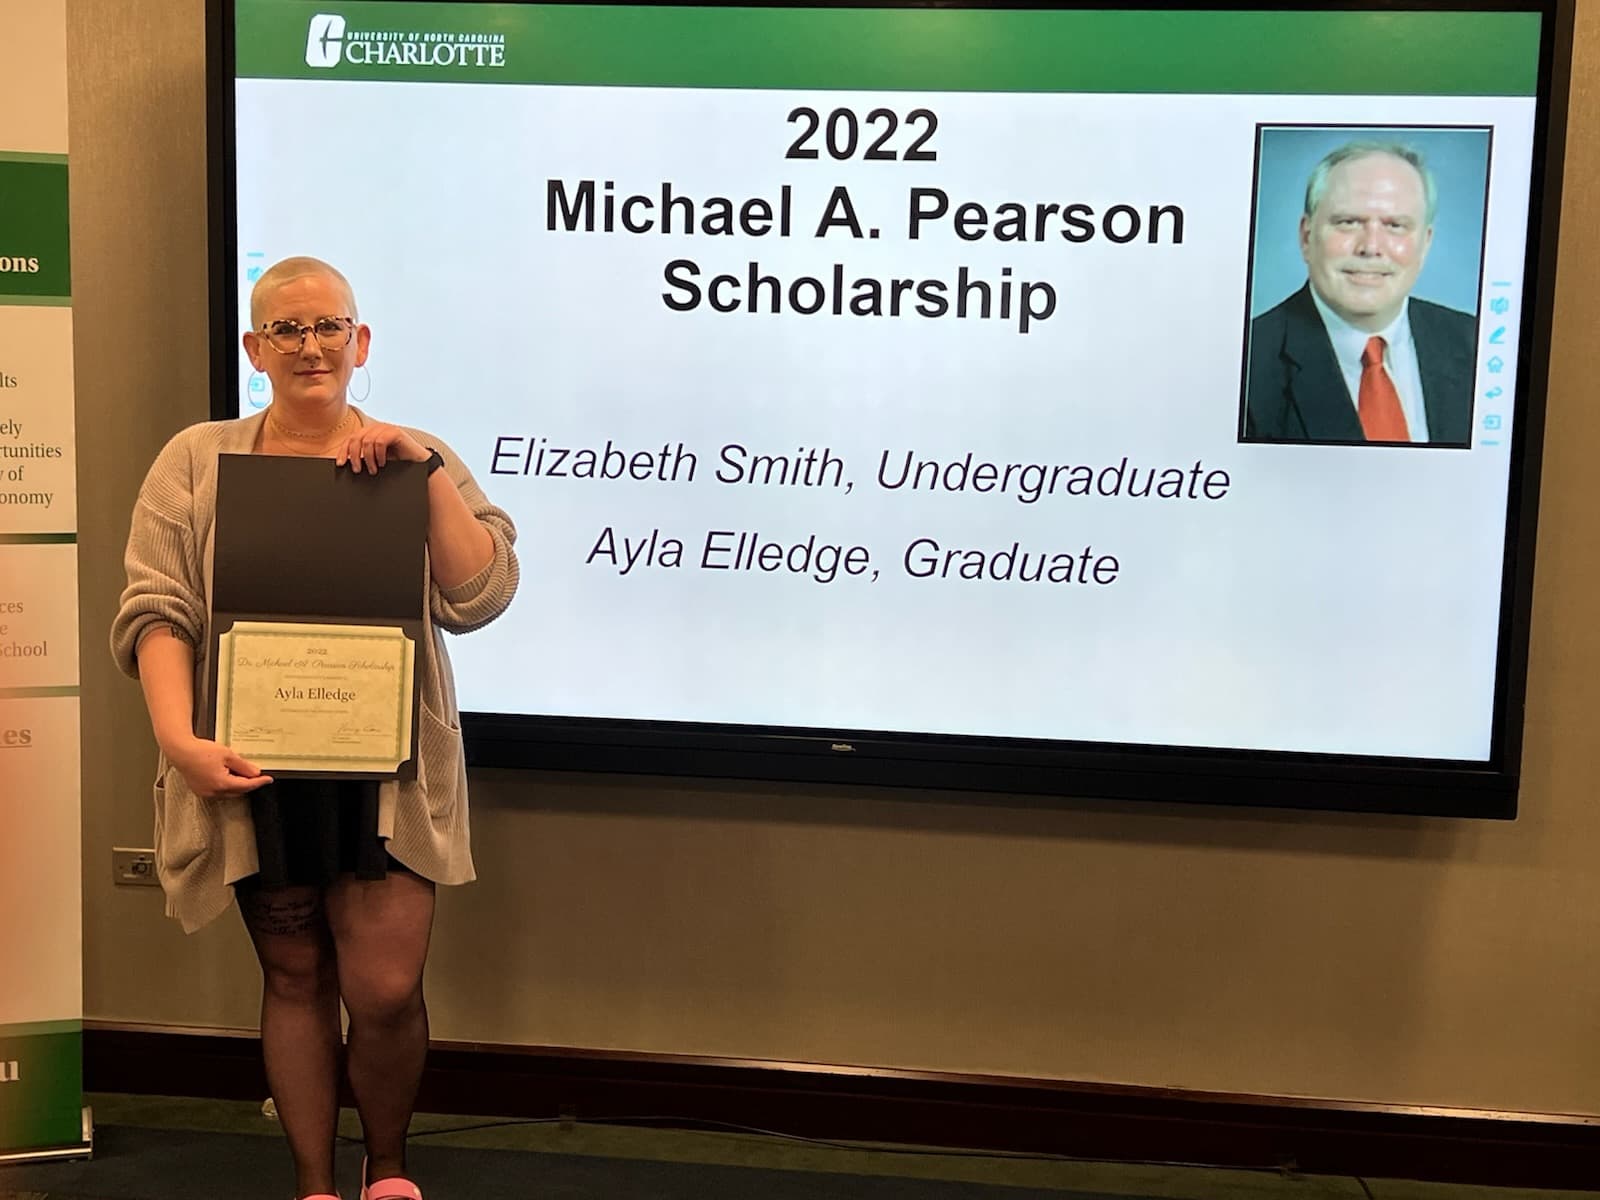 Ayla Elledge, graduate winner of the Michael A. Pearson Scholarship, standing with her award.